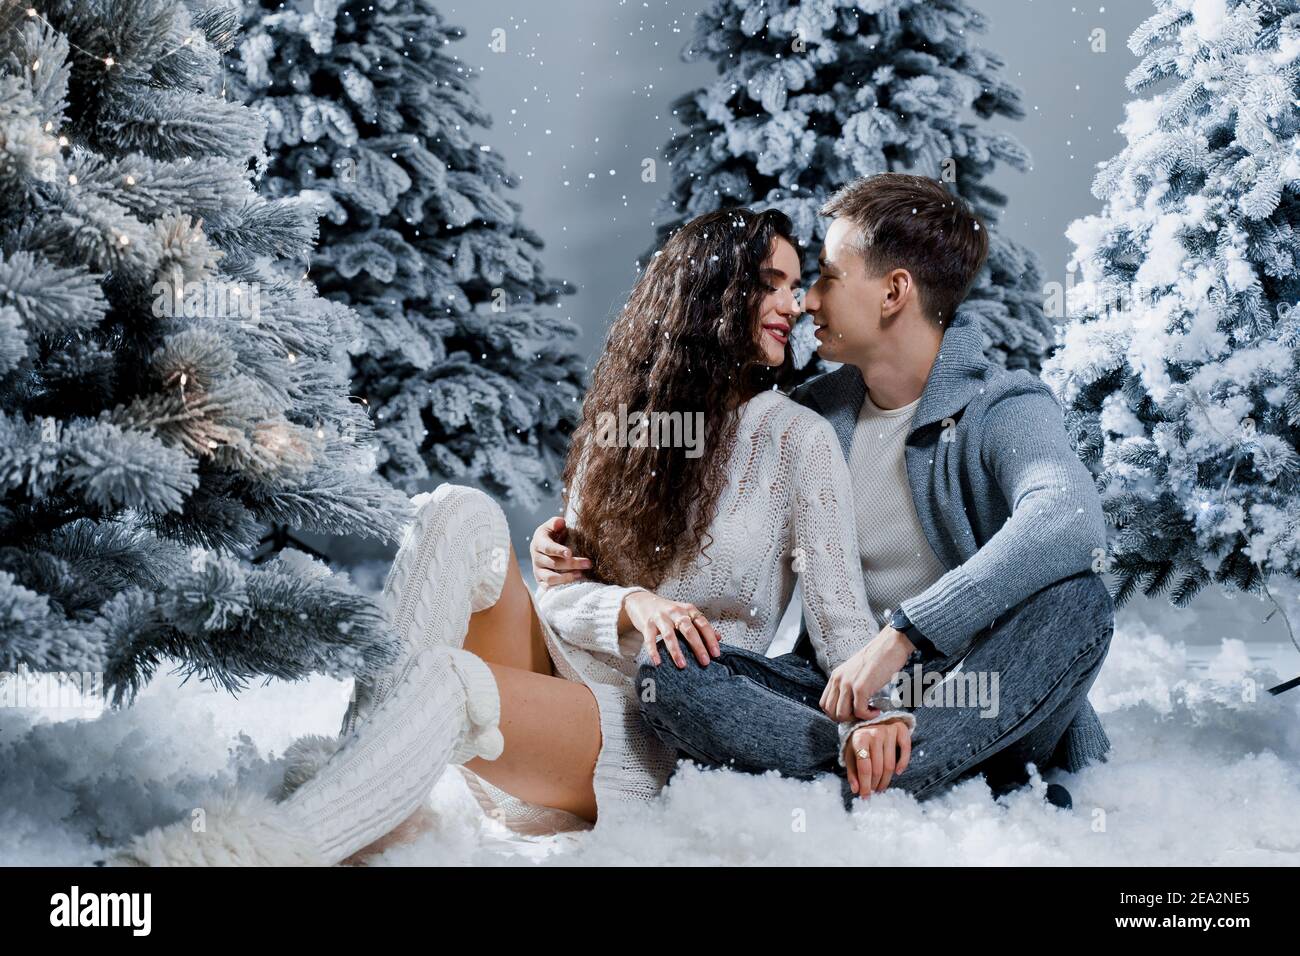 New year love story. Couple kiss and hug, snow is falling. Happy ...